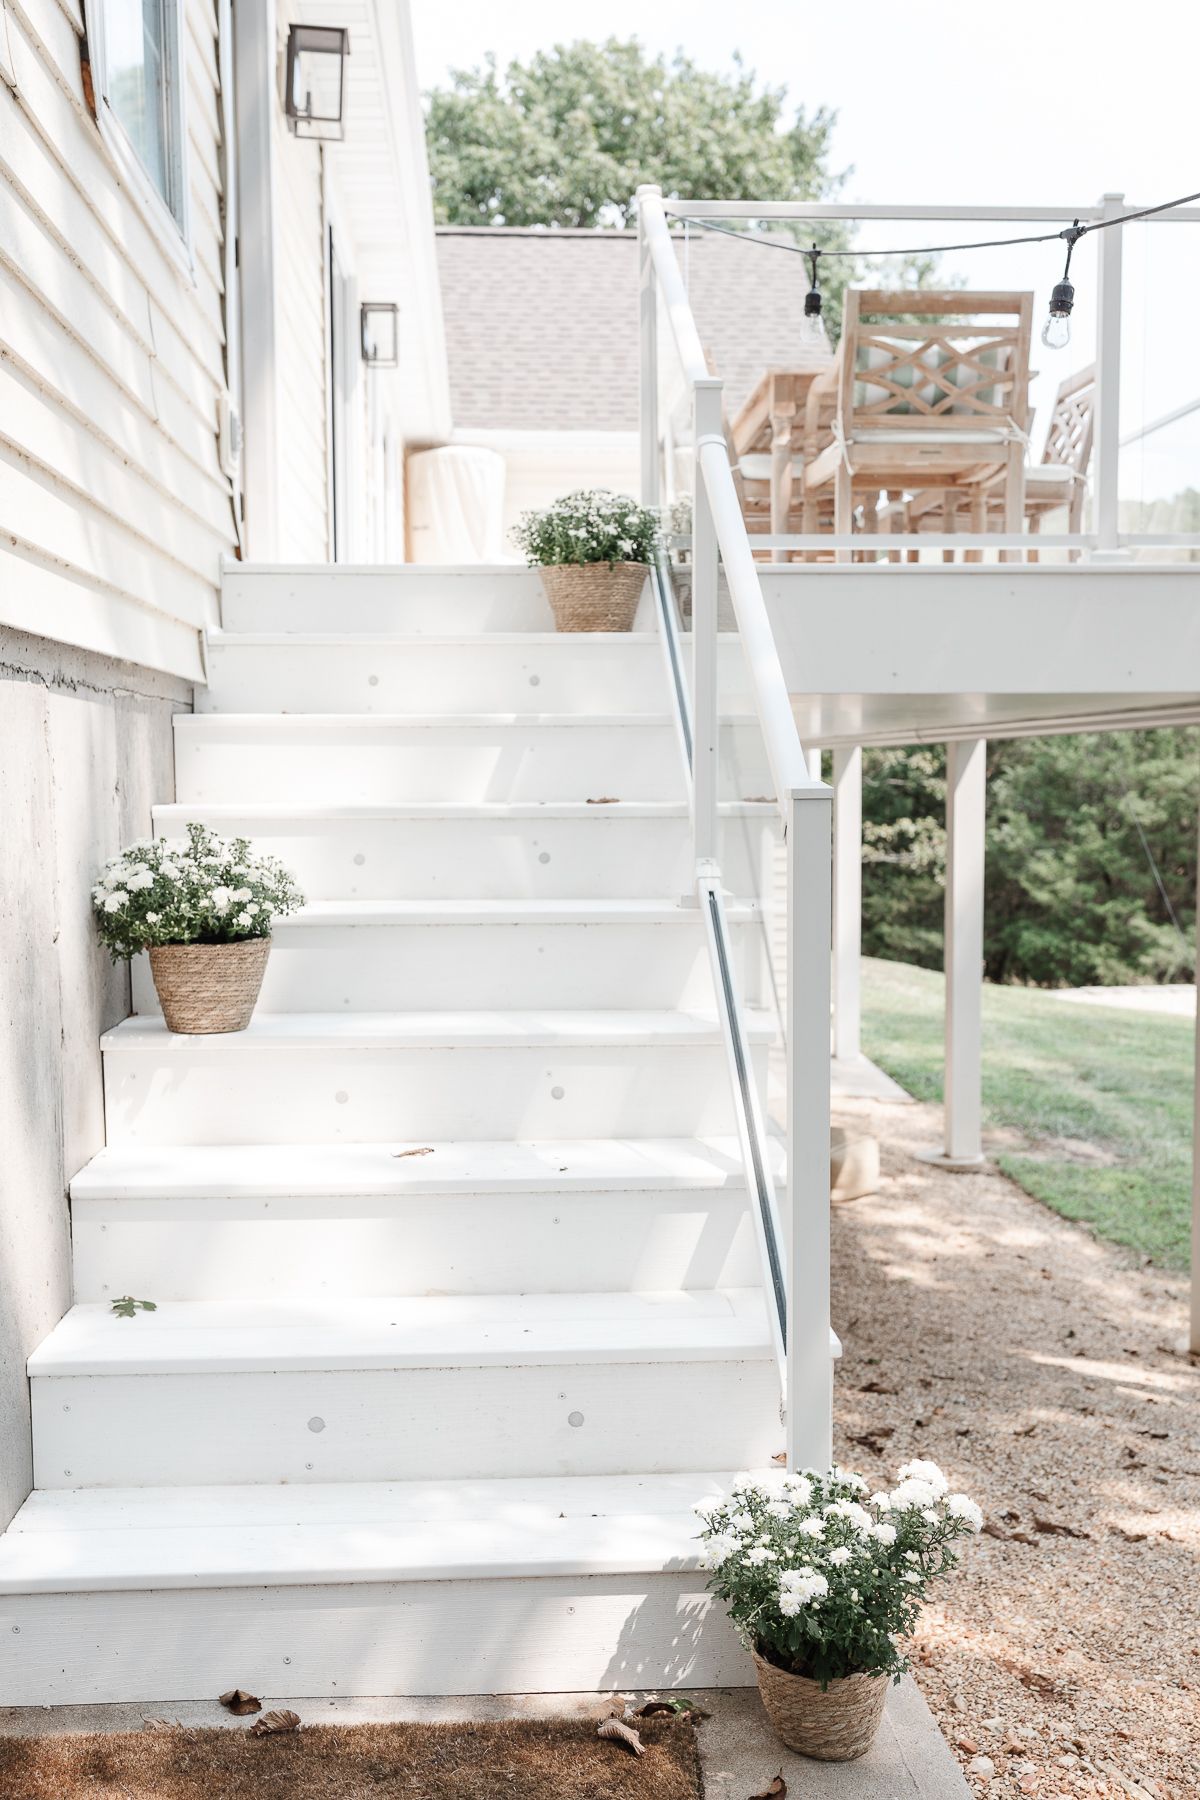 White vinyl deck stairs with discreet deck lighting on every other step.